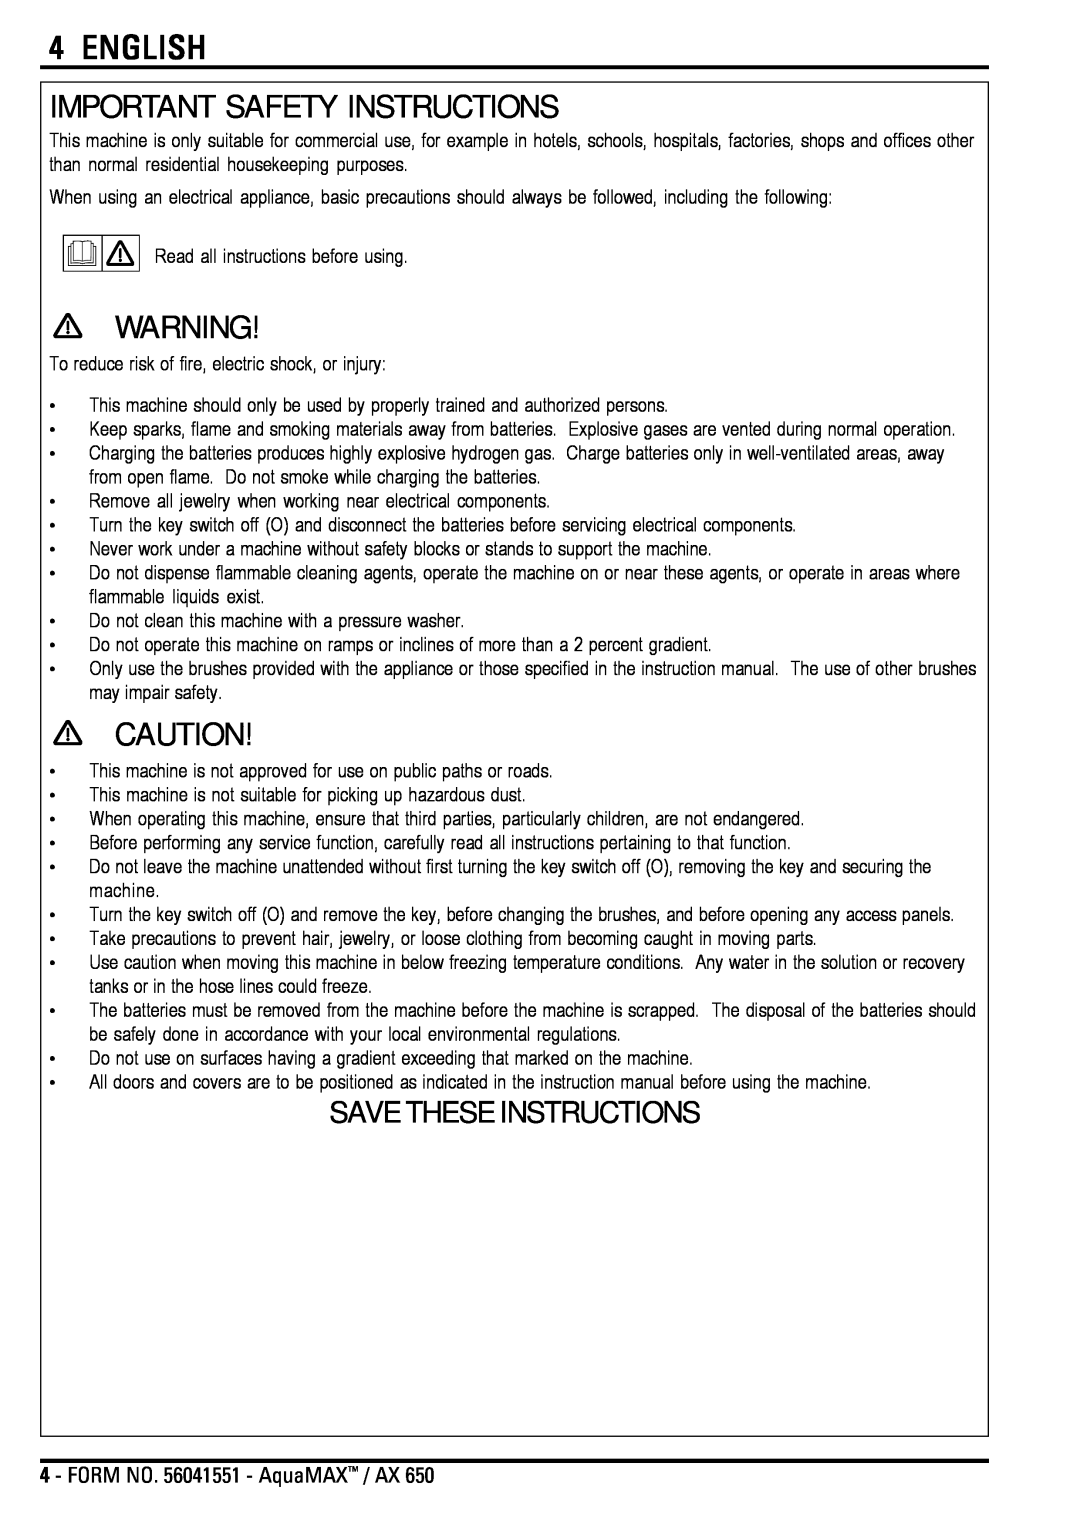 Nilfisk-Advance America AX 650 manual Important Safety Instructions, English, Save These Instructions 